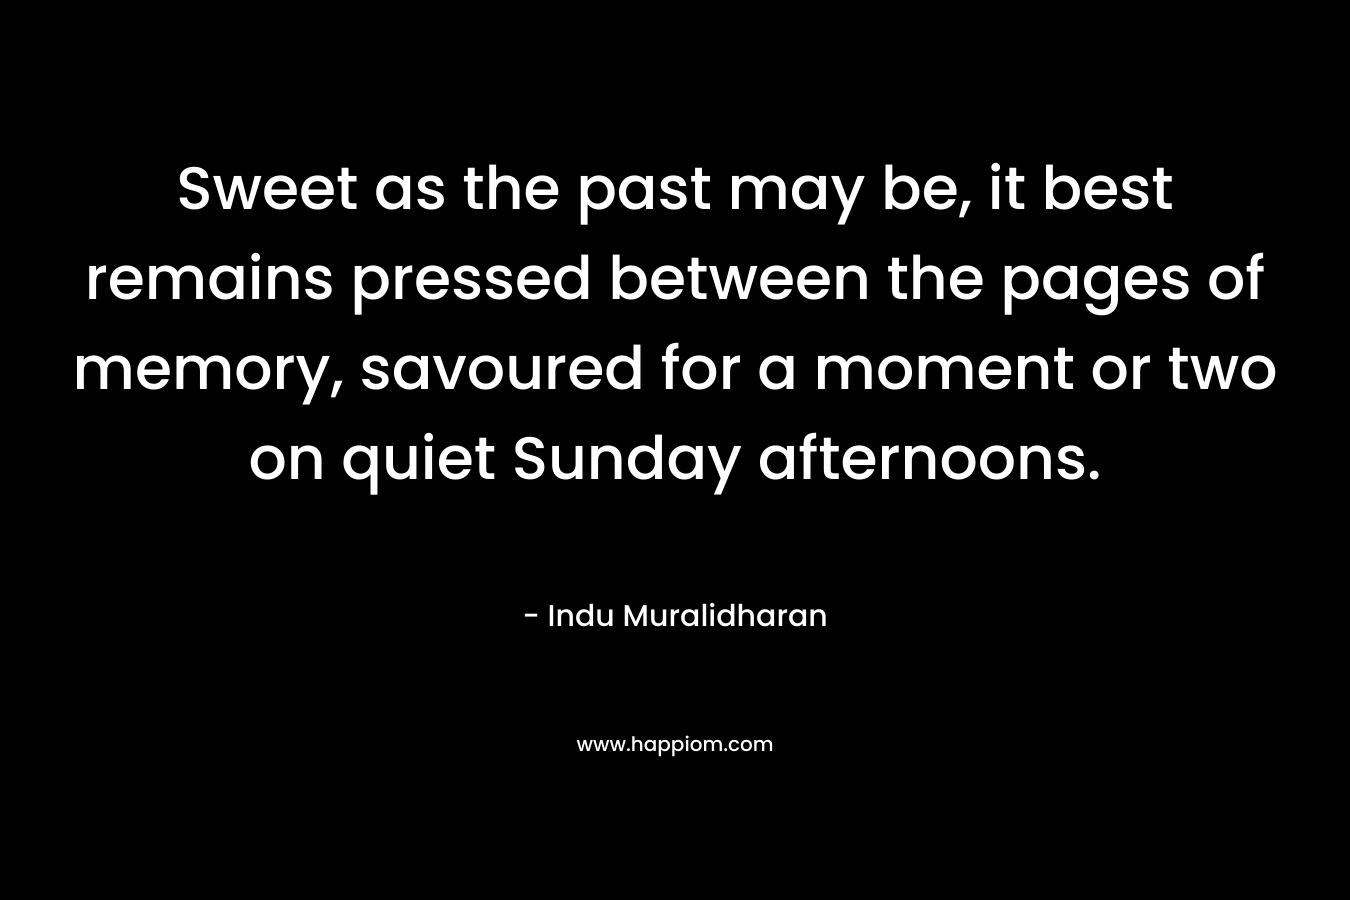 Sweet as the past may be, it best remains pressed between the pages of memory, savoured for a moment or two on quiet Sunday afternoons. – Indu Muralidharan